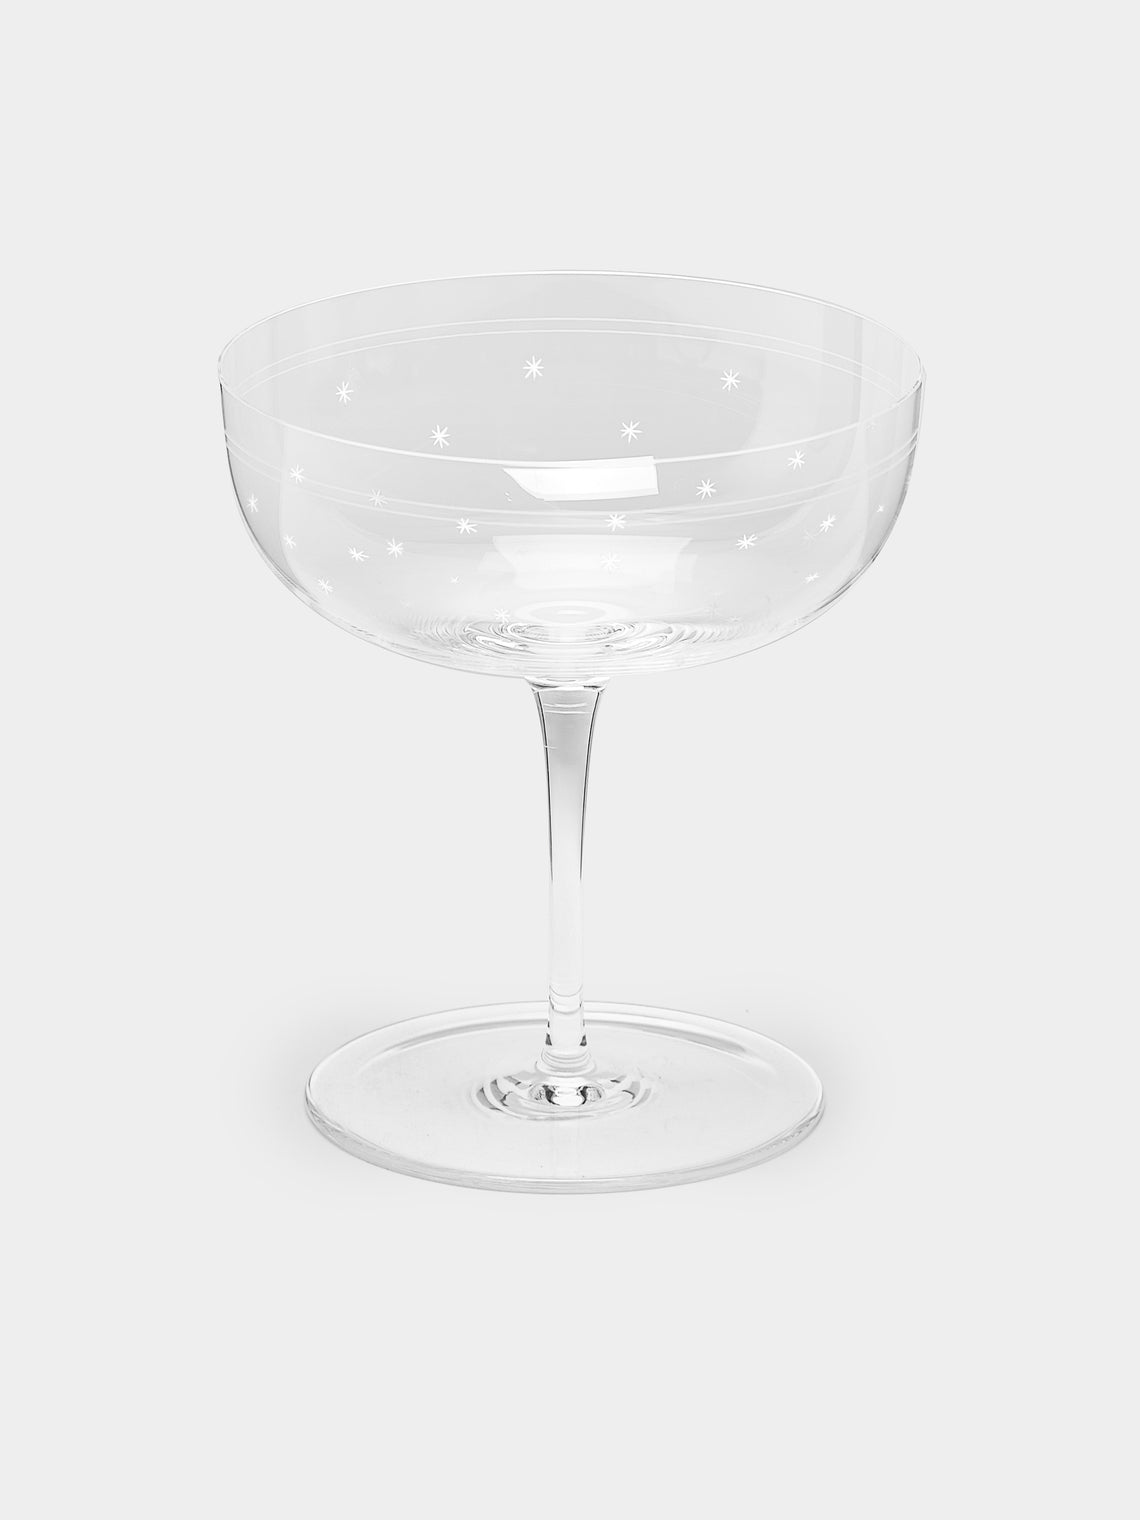 Lobmeyr - Rothschild Stars Hand-Engraved Crystal Champagne Coupe -  - ABASK - 